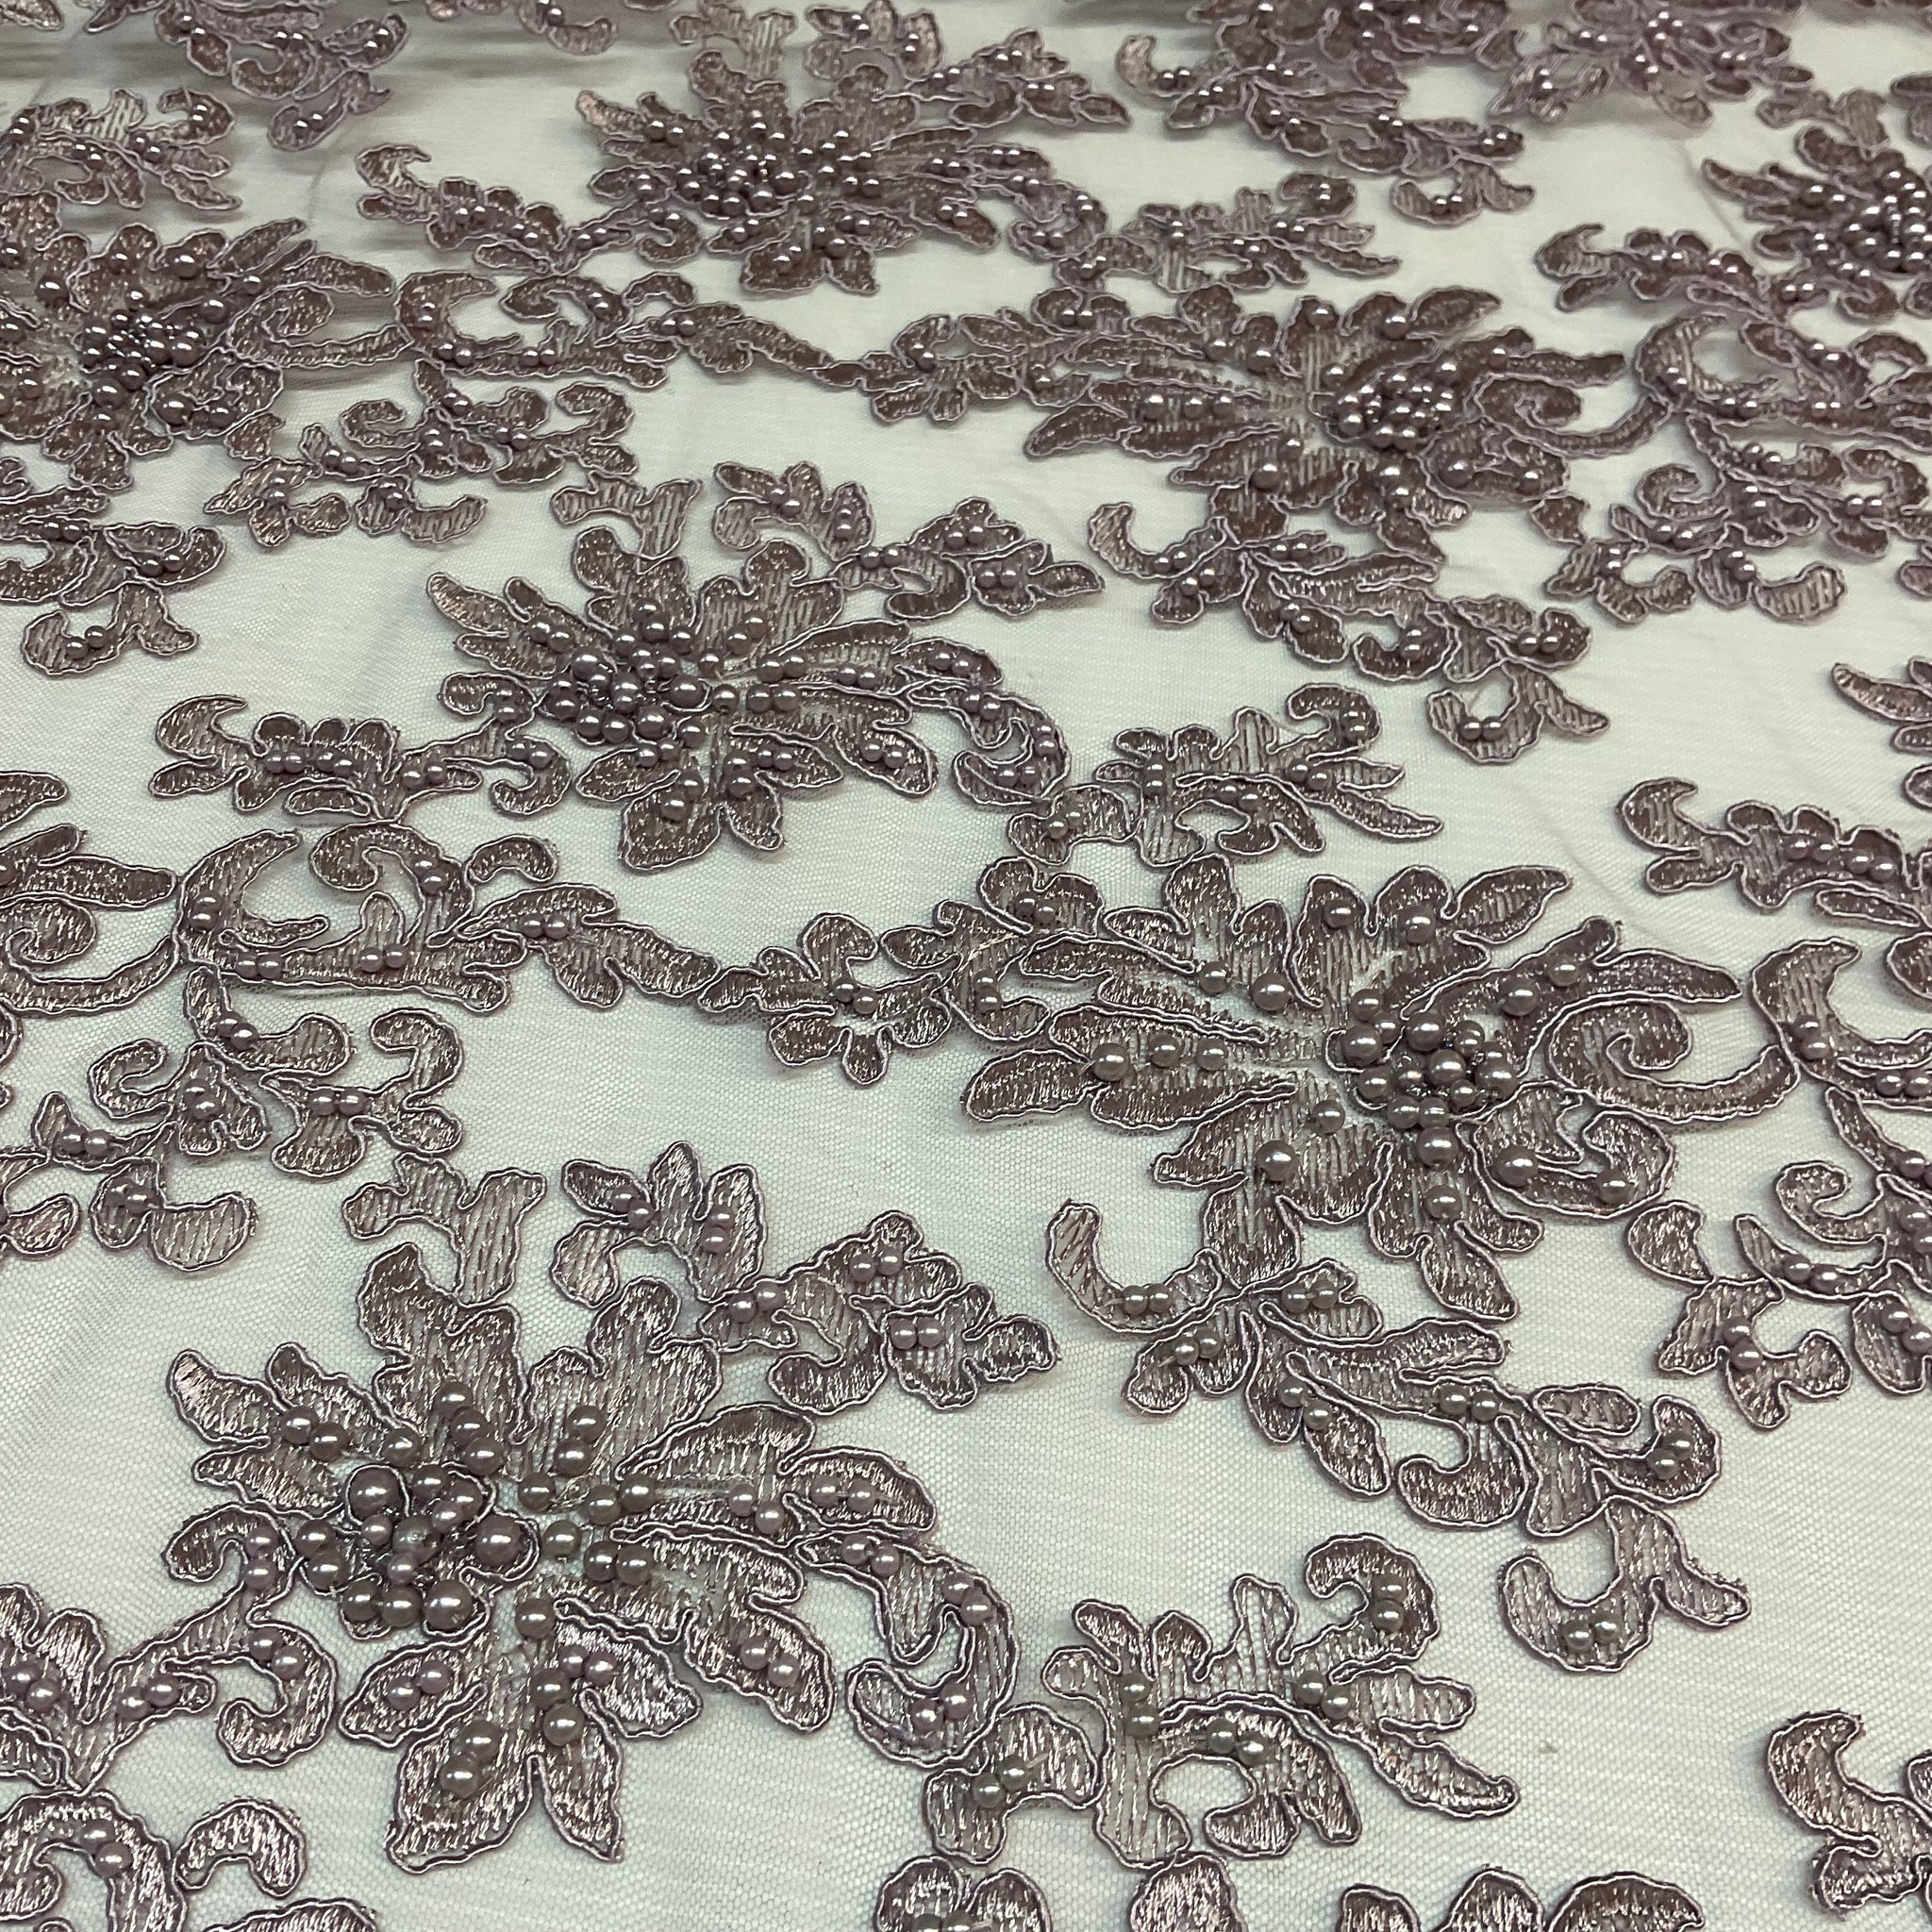 Mauve corded embroidery lace with mauve faux pearls - Double scalloped border Fabric -M1400-34